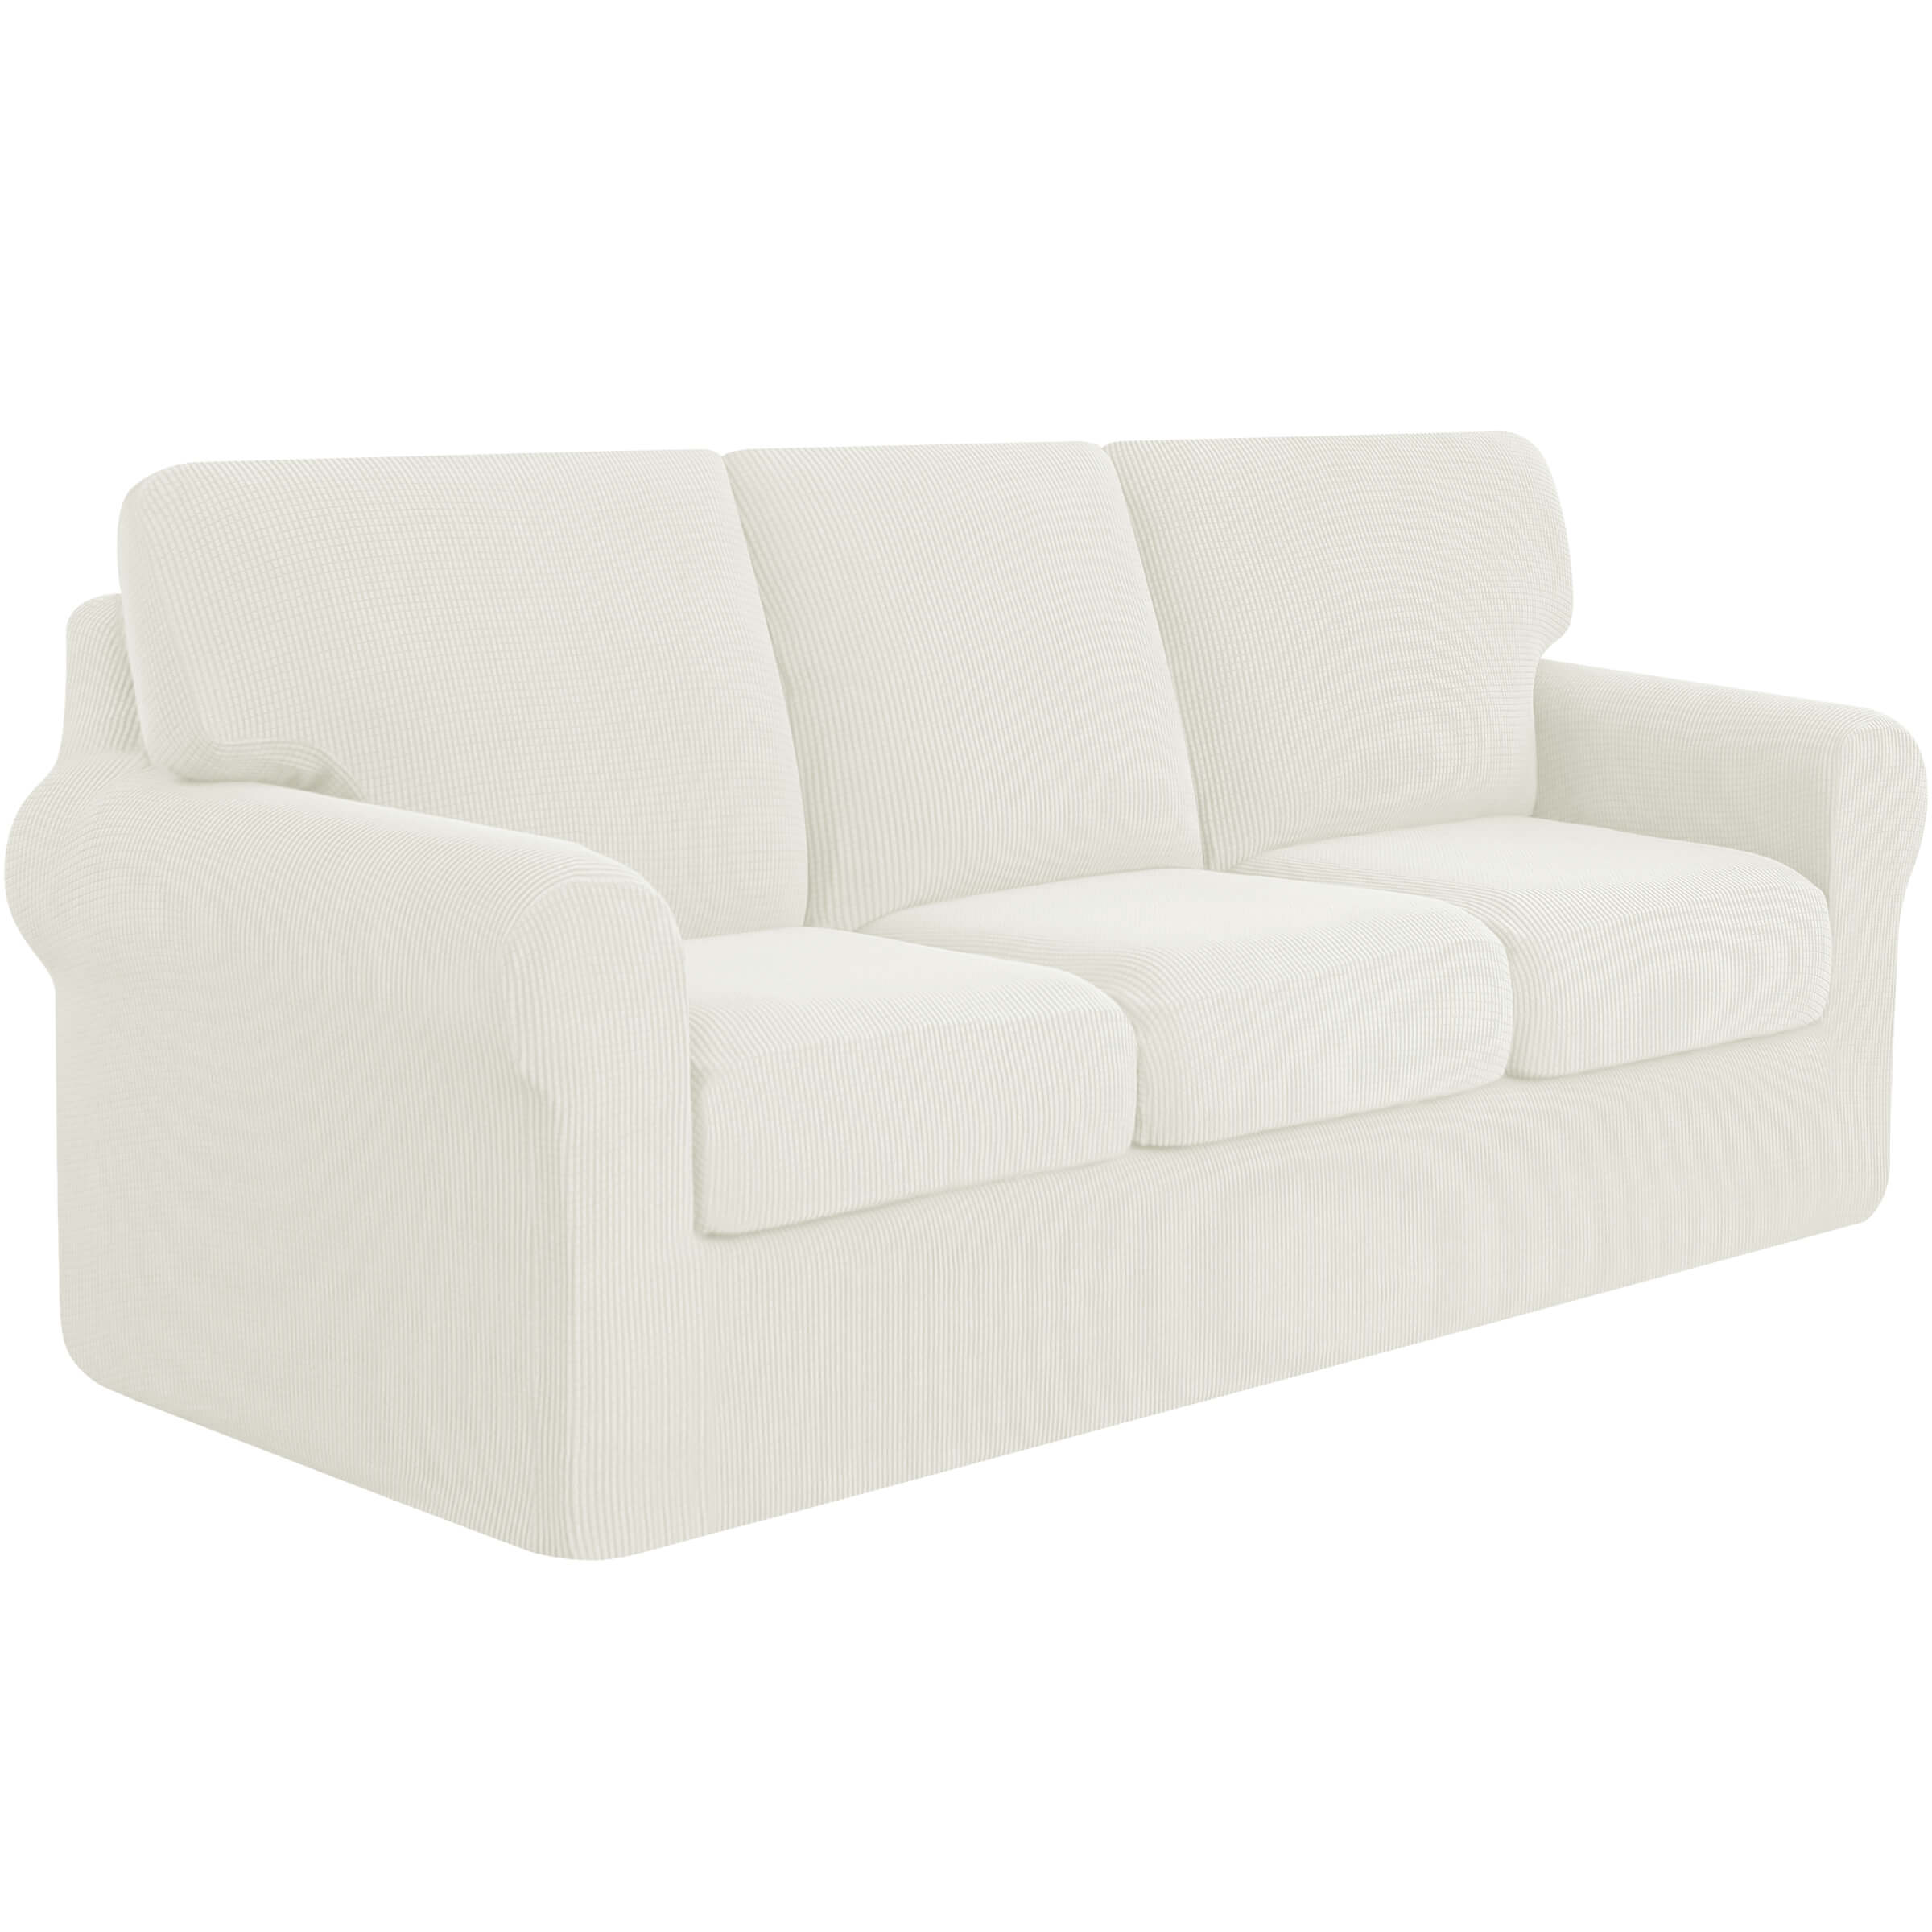 Stretch Sofa Slipcover Sets with Backrest Cushion Cover and Seat Cushion Cover